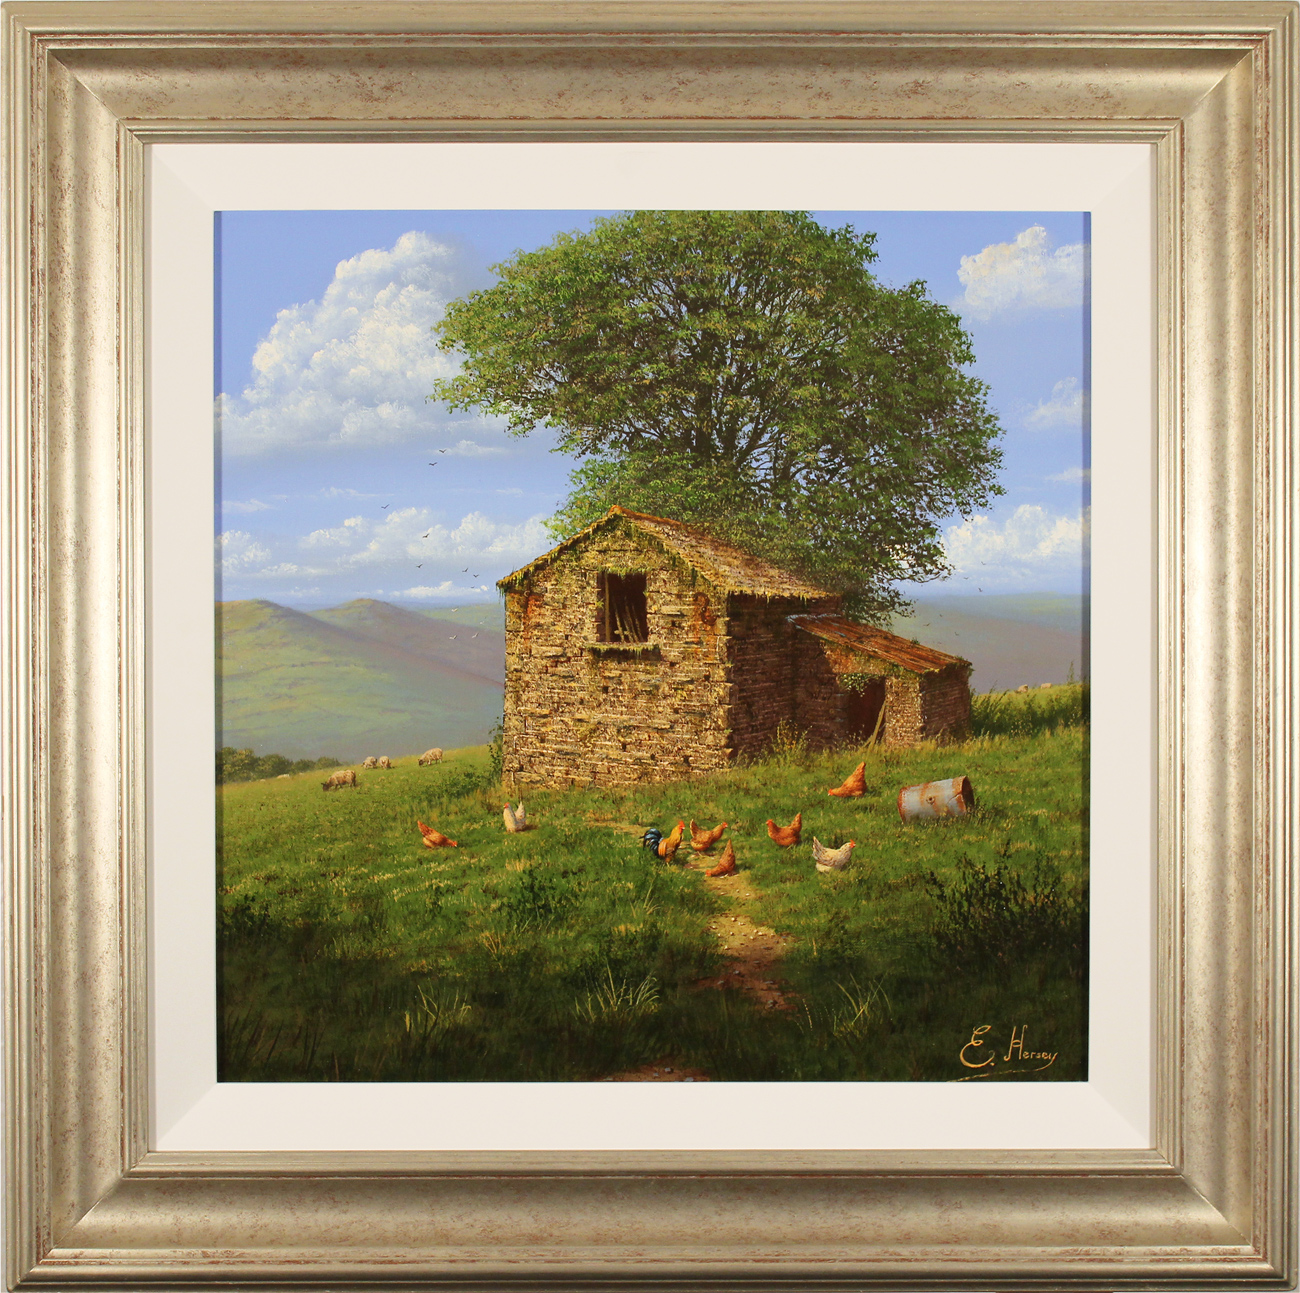 Edward Hersey, Original oil painting on canvas, The Lone Barn, Yorkshire Dales. Click to enlarge